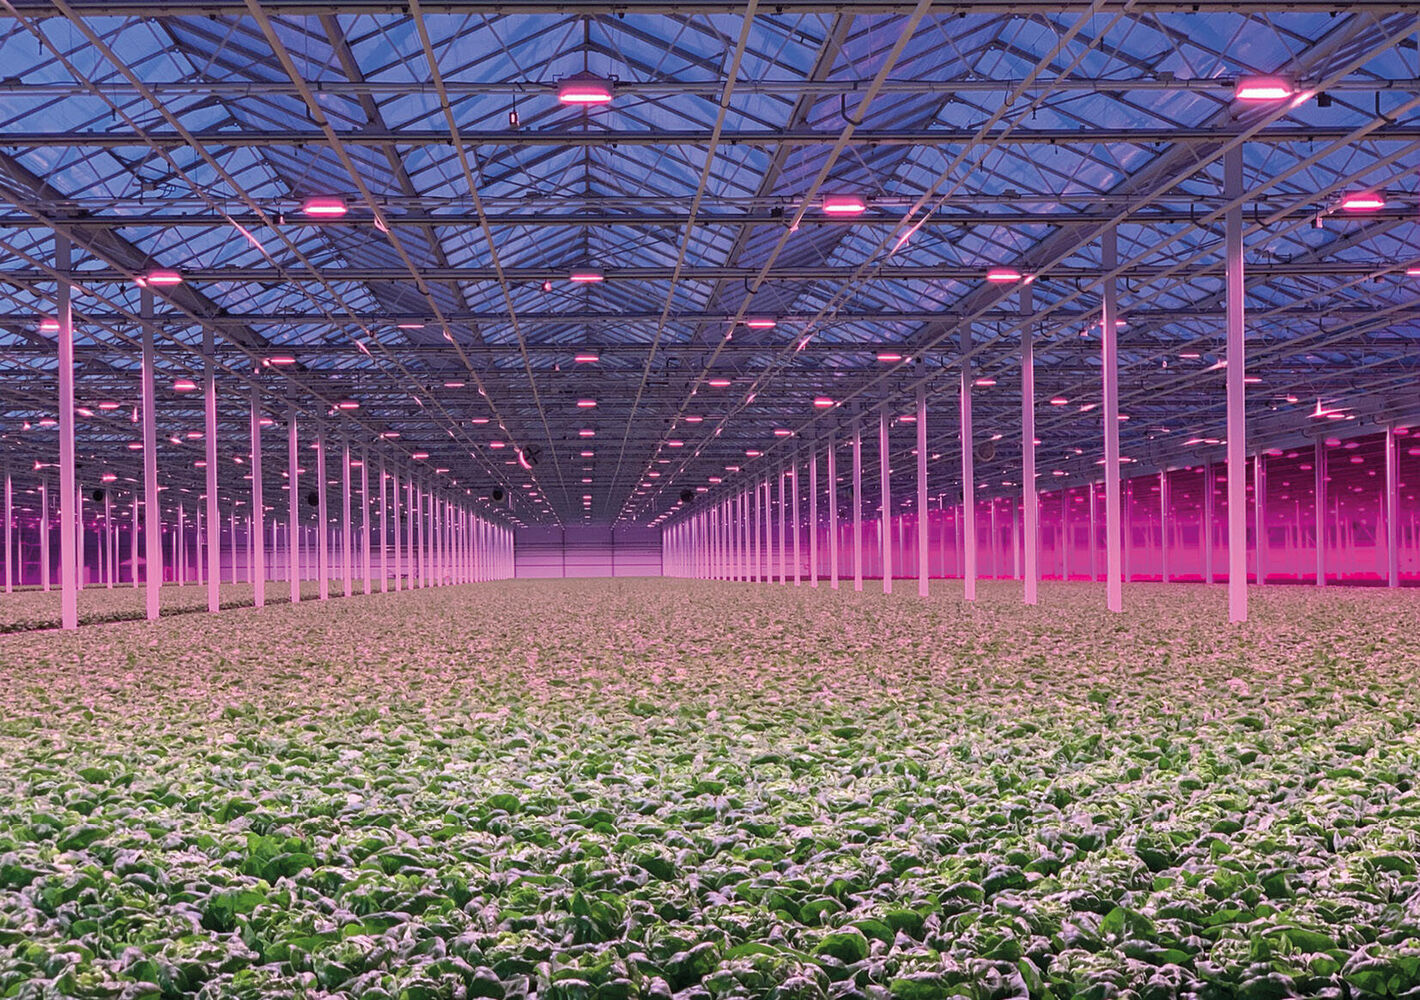 Dimmable and spectrum flexible LED fixtures offer growers maximum control over lighting installation